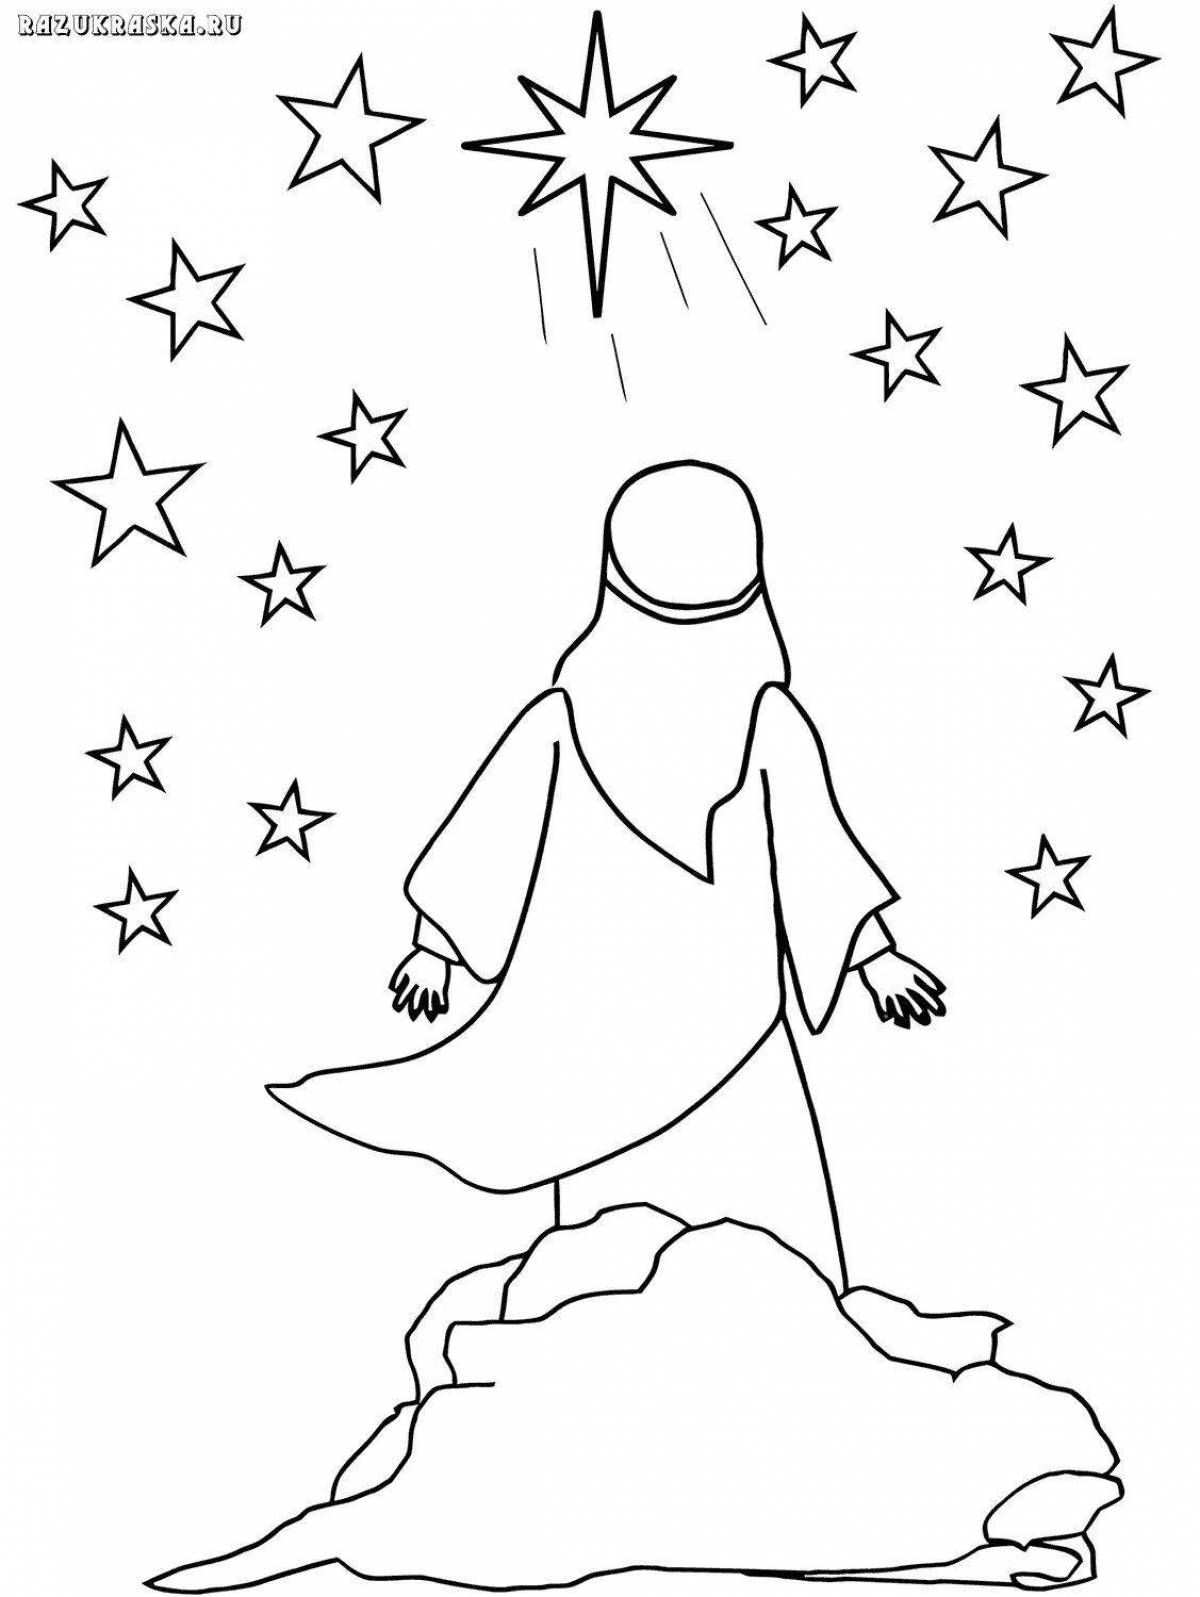 Artistic star of bethlehem coloring pages for kids